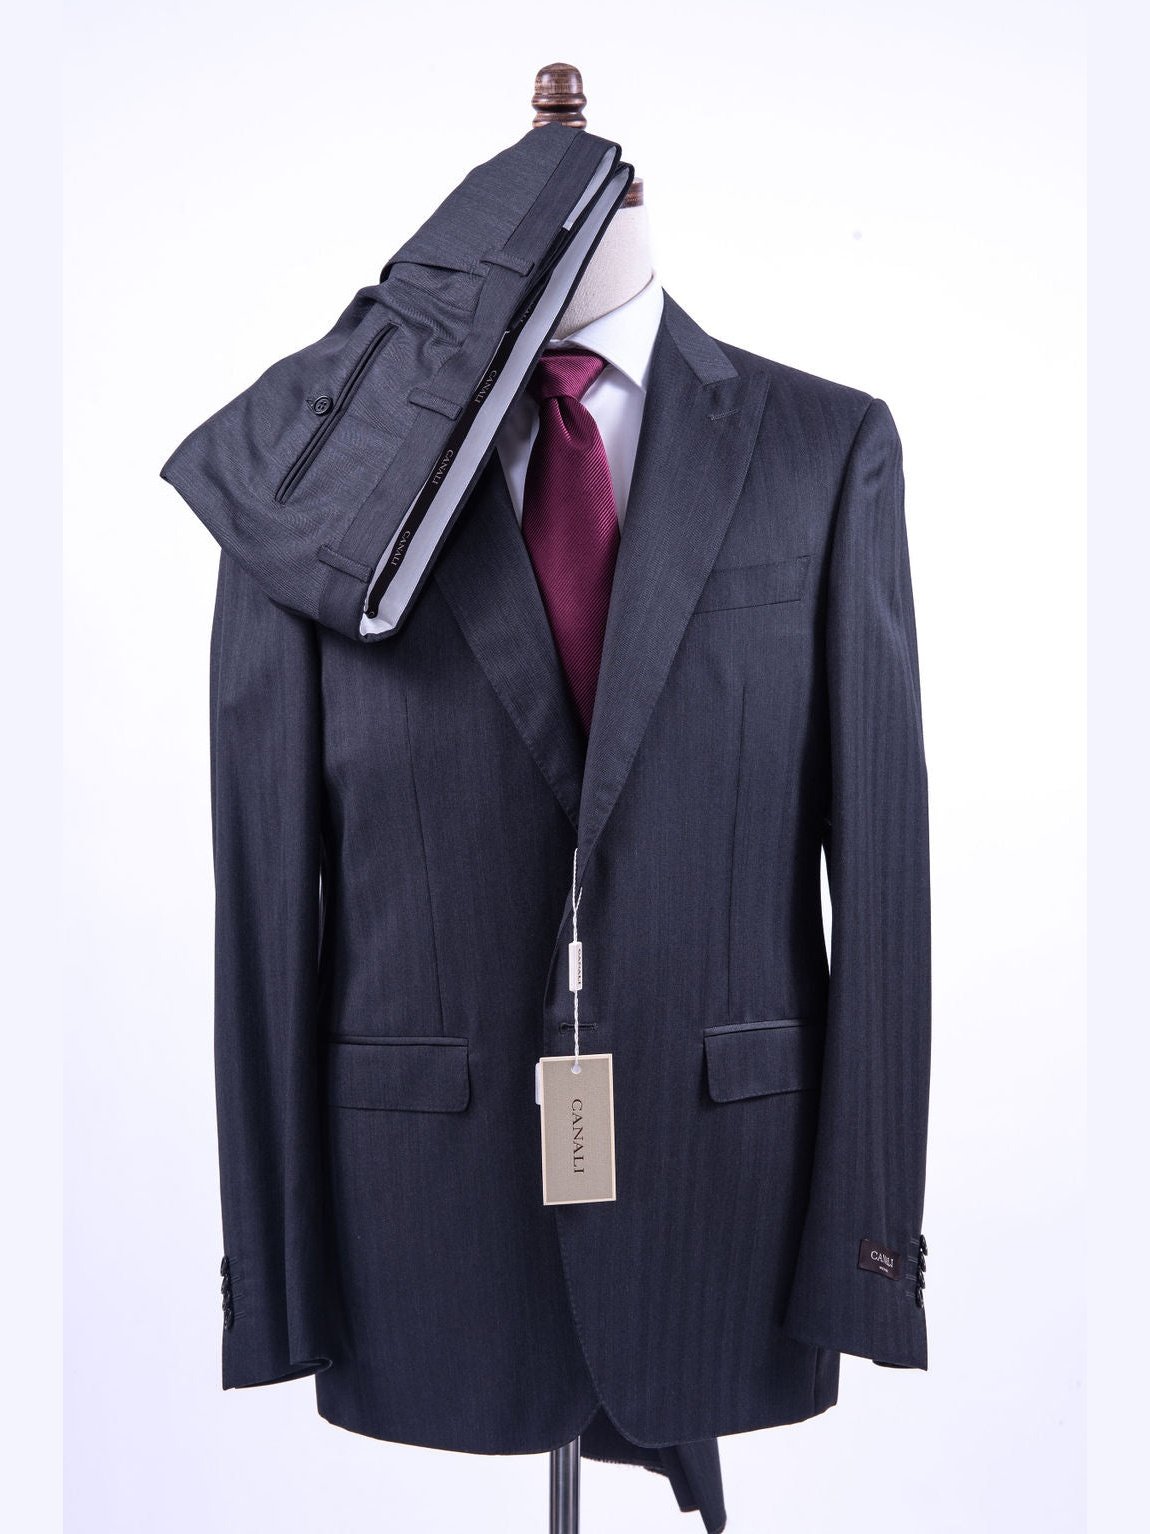 Canali Mens Charcoal Gray Herringbone 42R Drop 8 100% Wool 2 Button 2 Piece Suit